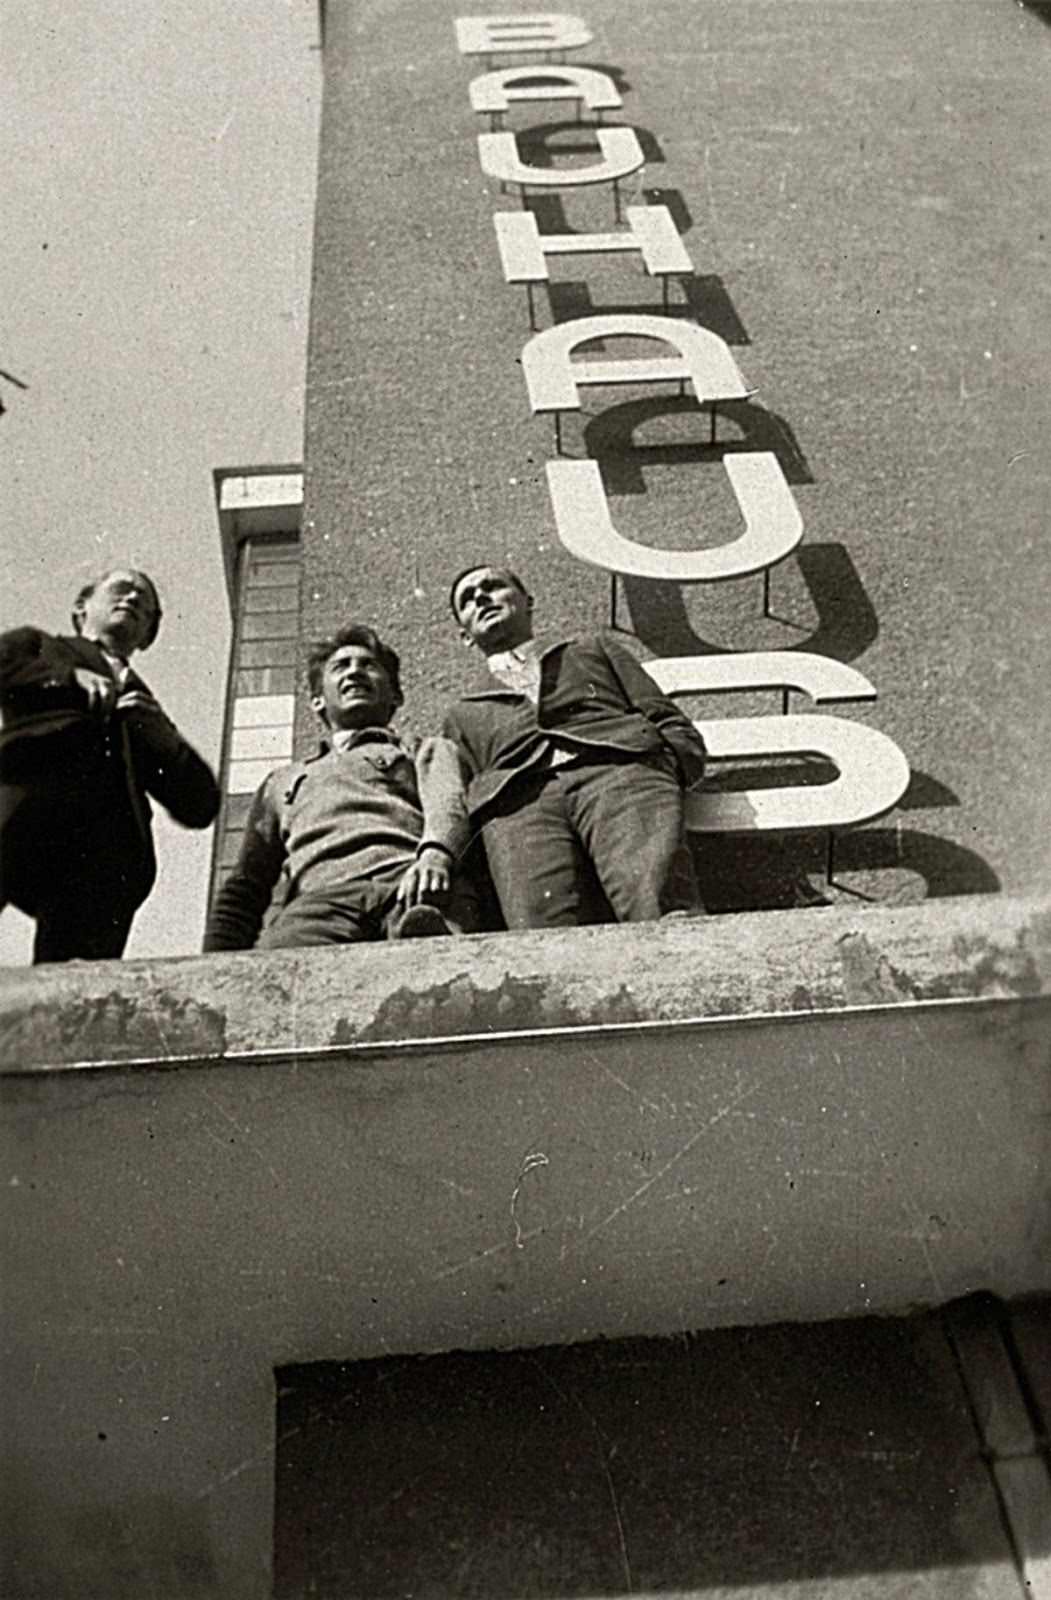 A Visual Journey into the Bauhaus School of the 1920s - Pioneers of Modern Design